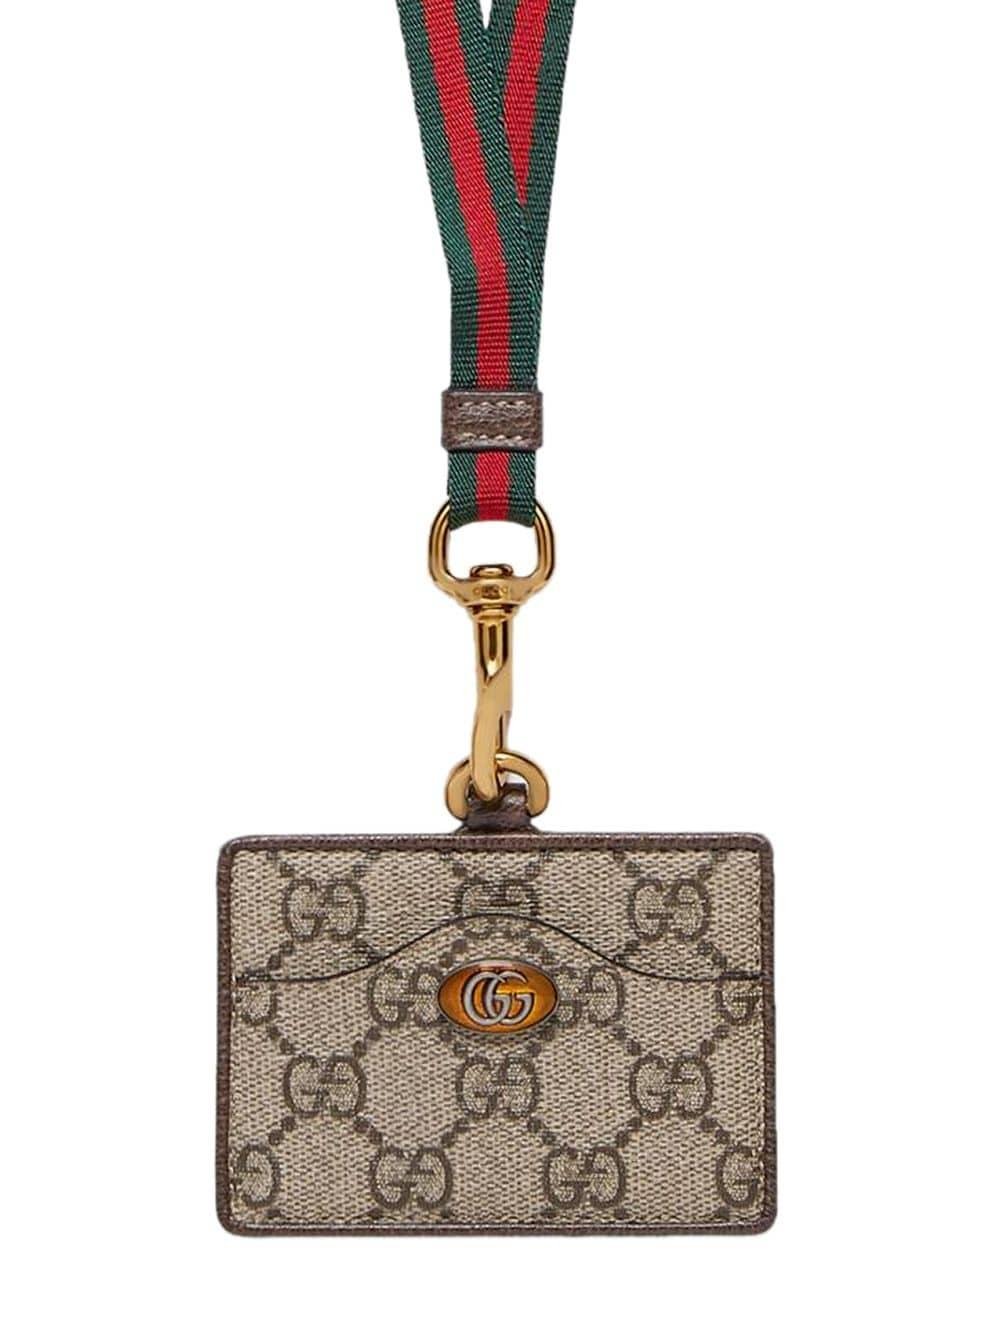 Gucci Ophidia GG Supreme Id Holder | Lyst